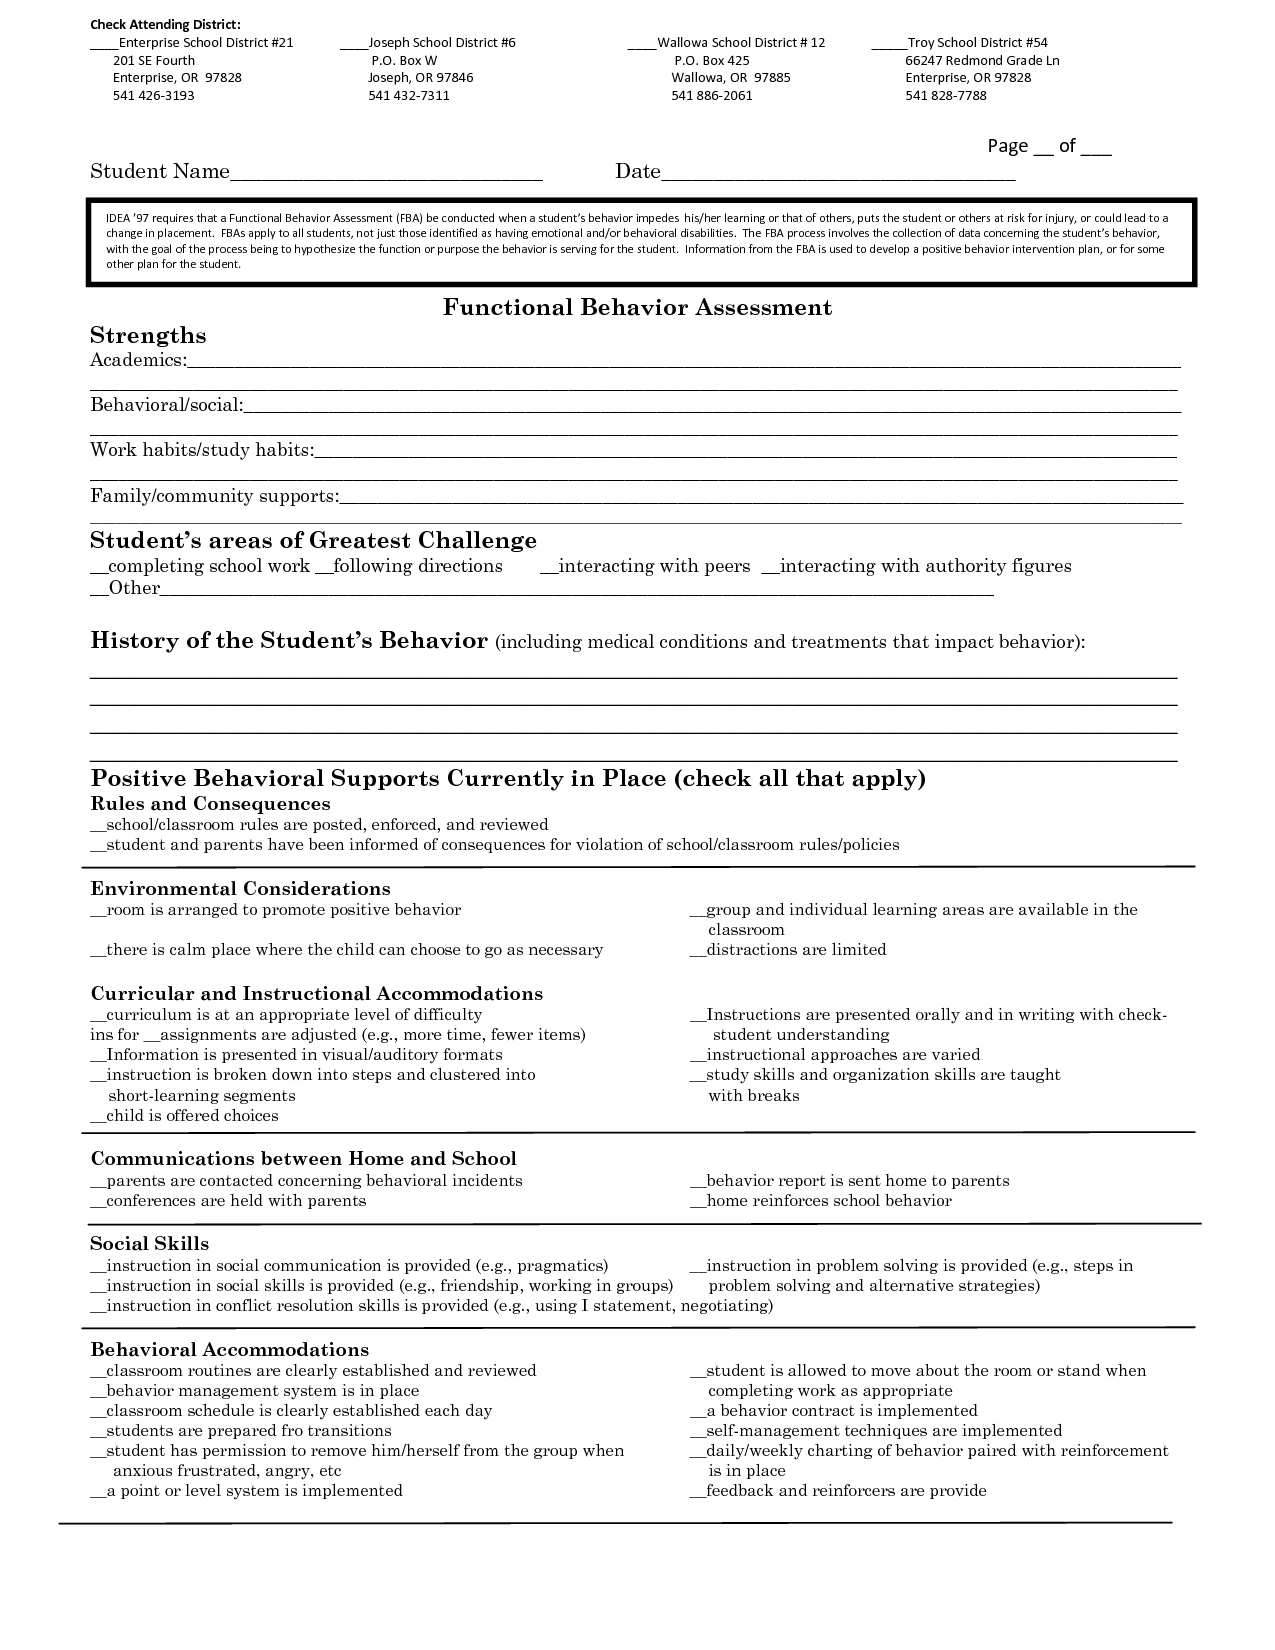 17-best-images-of-behavior-modification-worksheets-for-adults-body-outline-therapy-worksheet